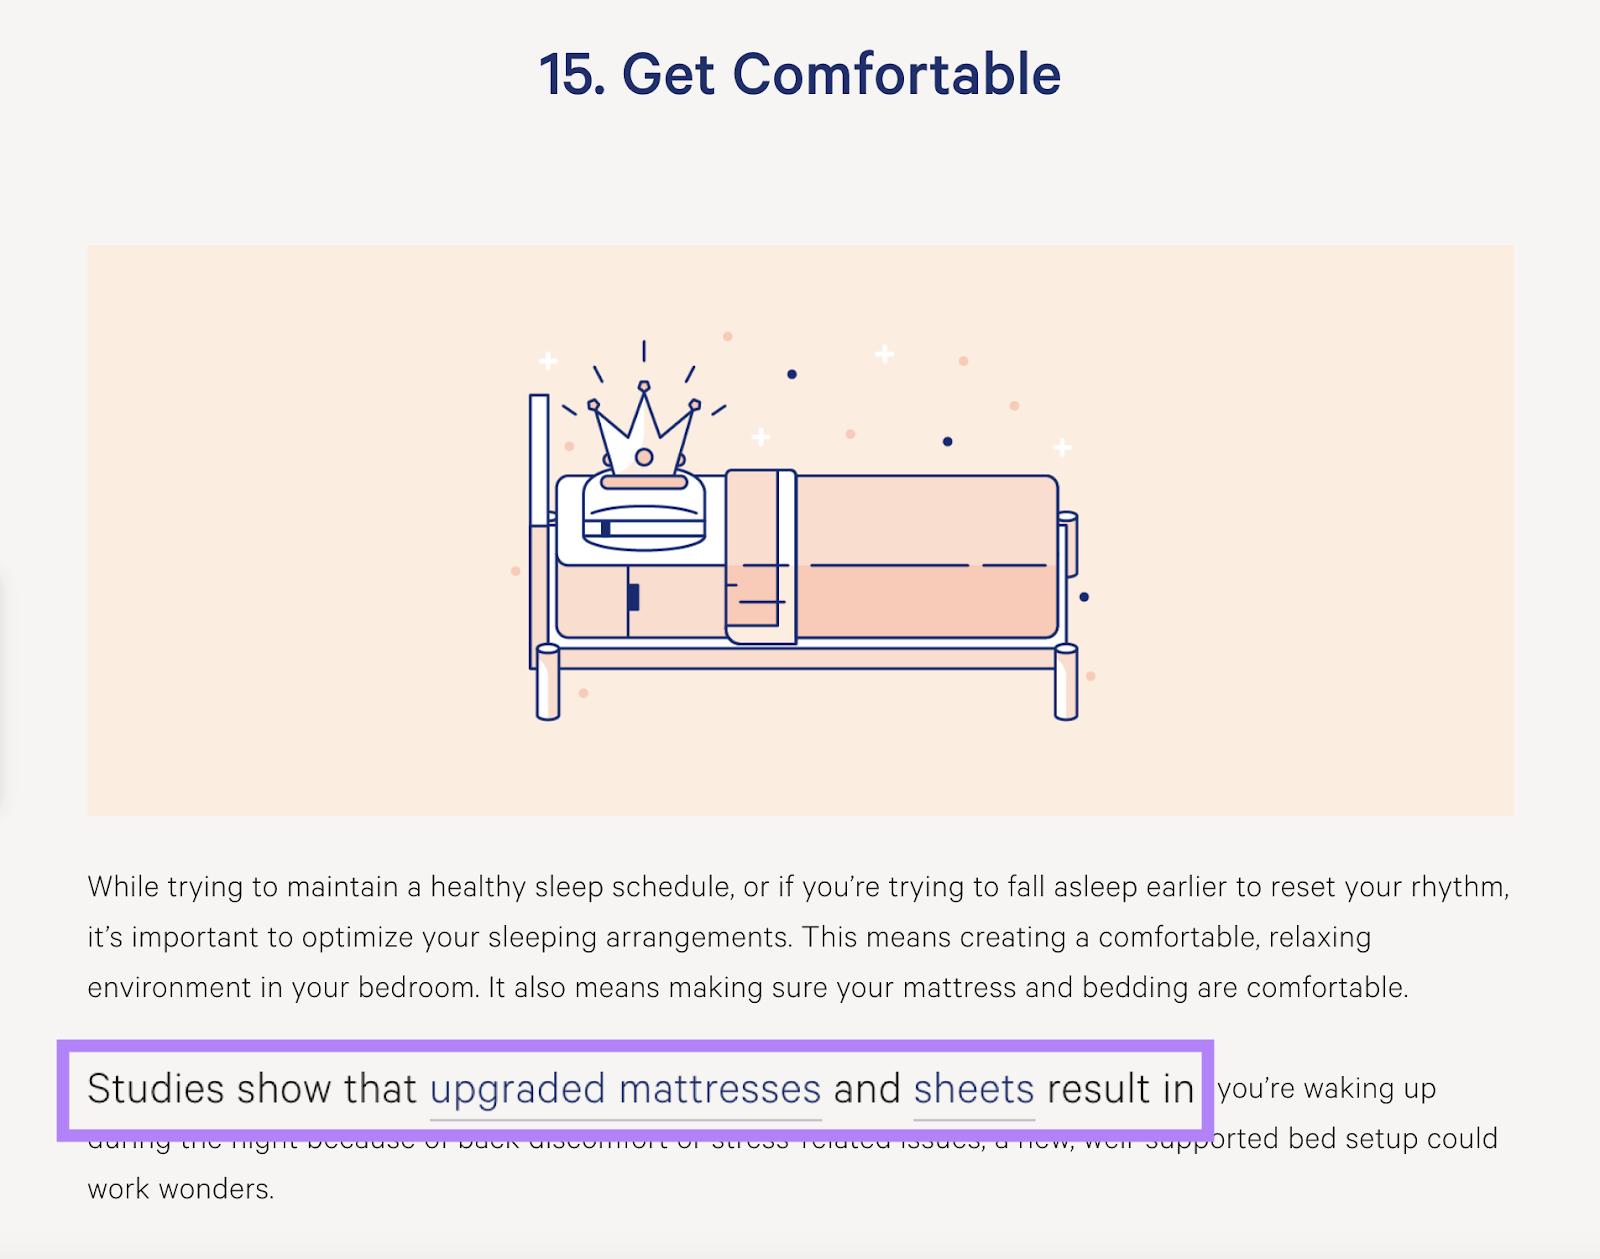 Casper shares data-backed tips in their article on sleep schedule